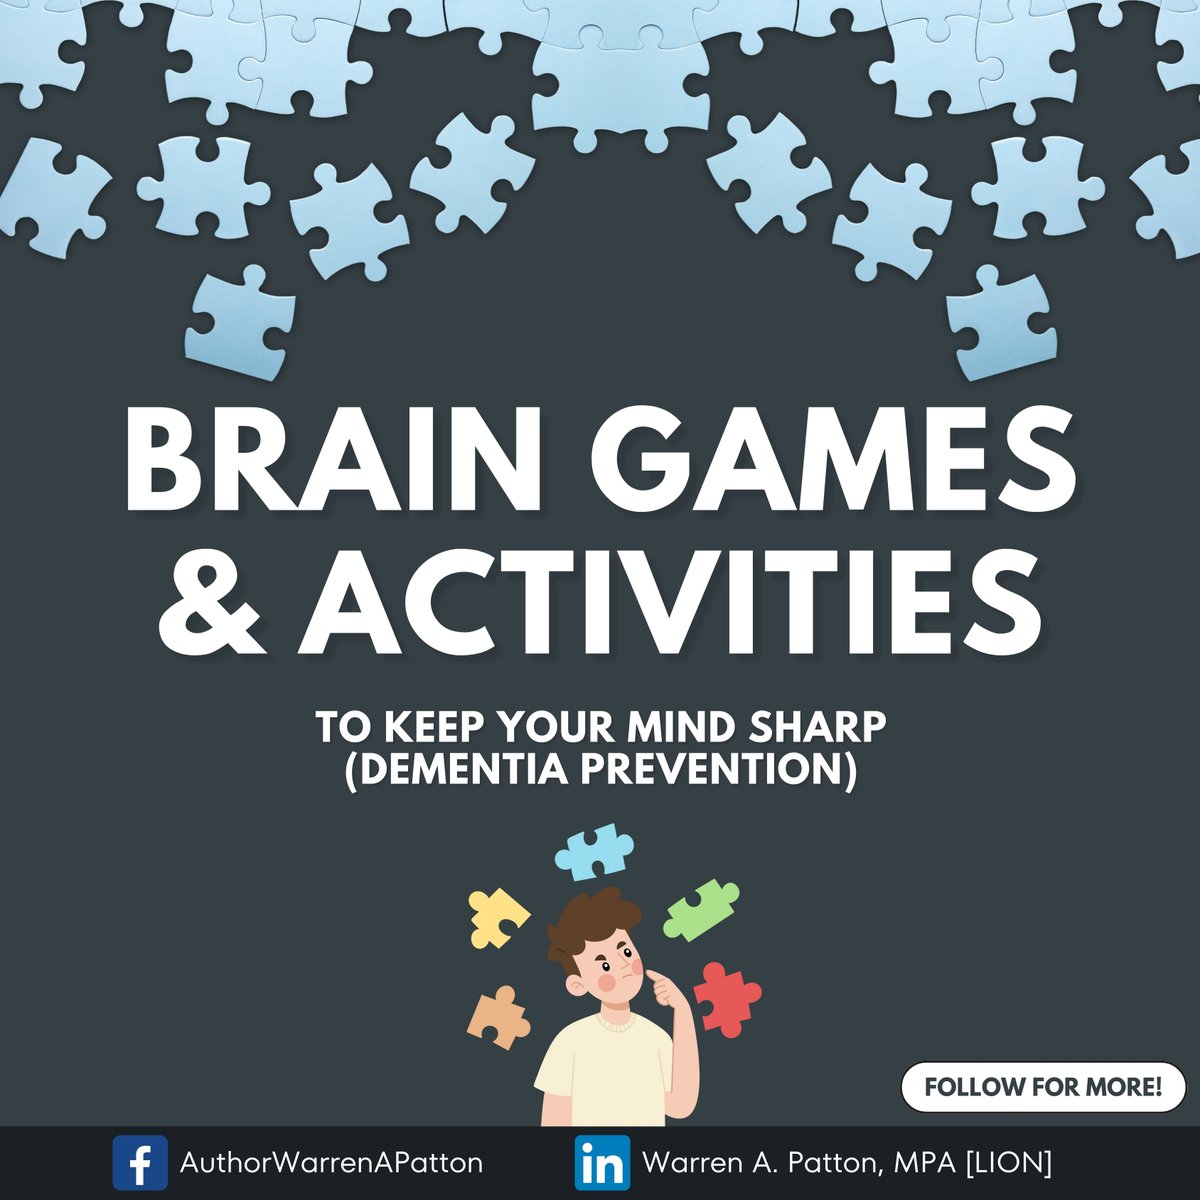 Keep your brain healthy!  

Did you know that playing board games and crossword puzzles are some ways to prevent further decline and maintain a healthy brain? As simple as these activities are, they can sharpen your mind and help you take control of your brain health.